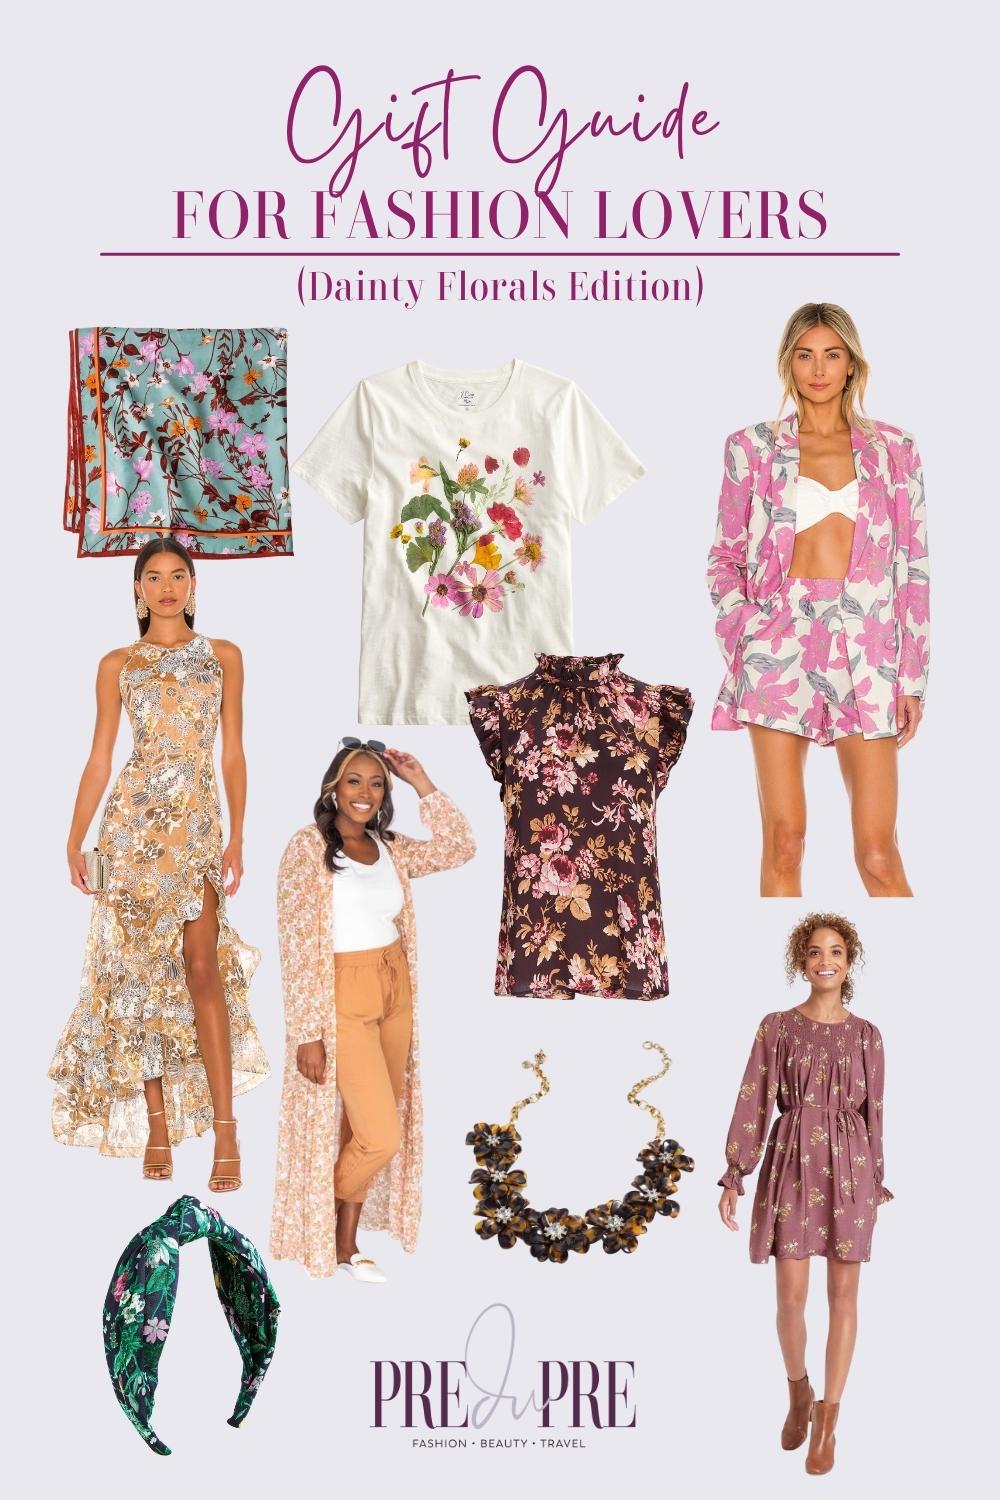 gift guide for floral print lovers.  includes dresses and accessories